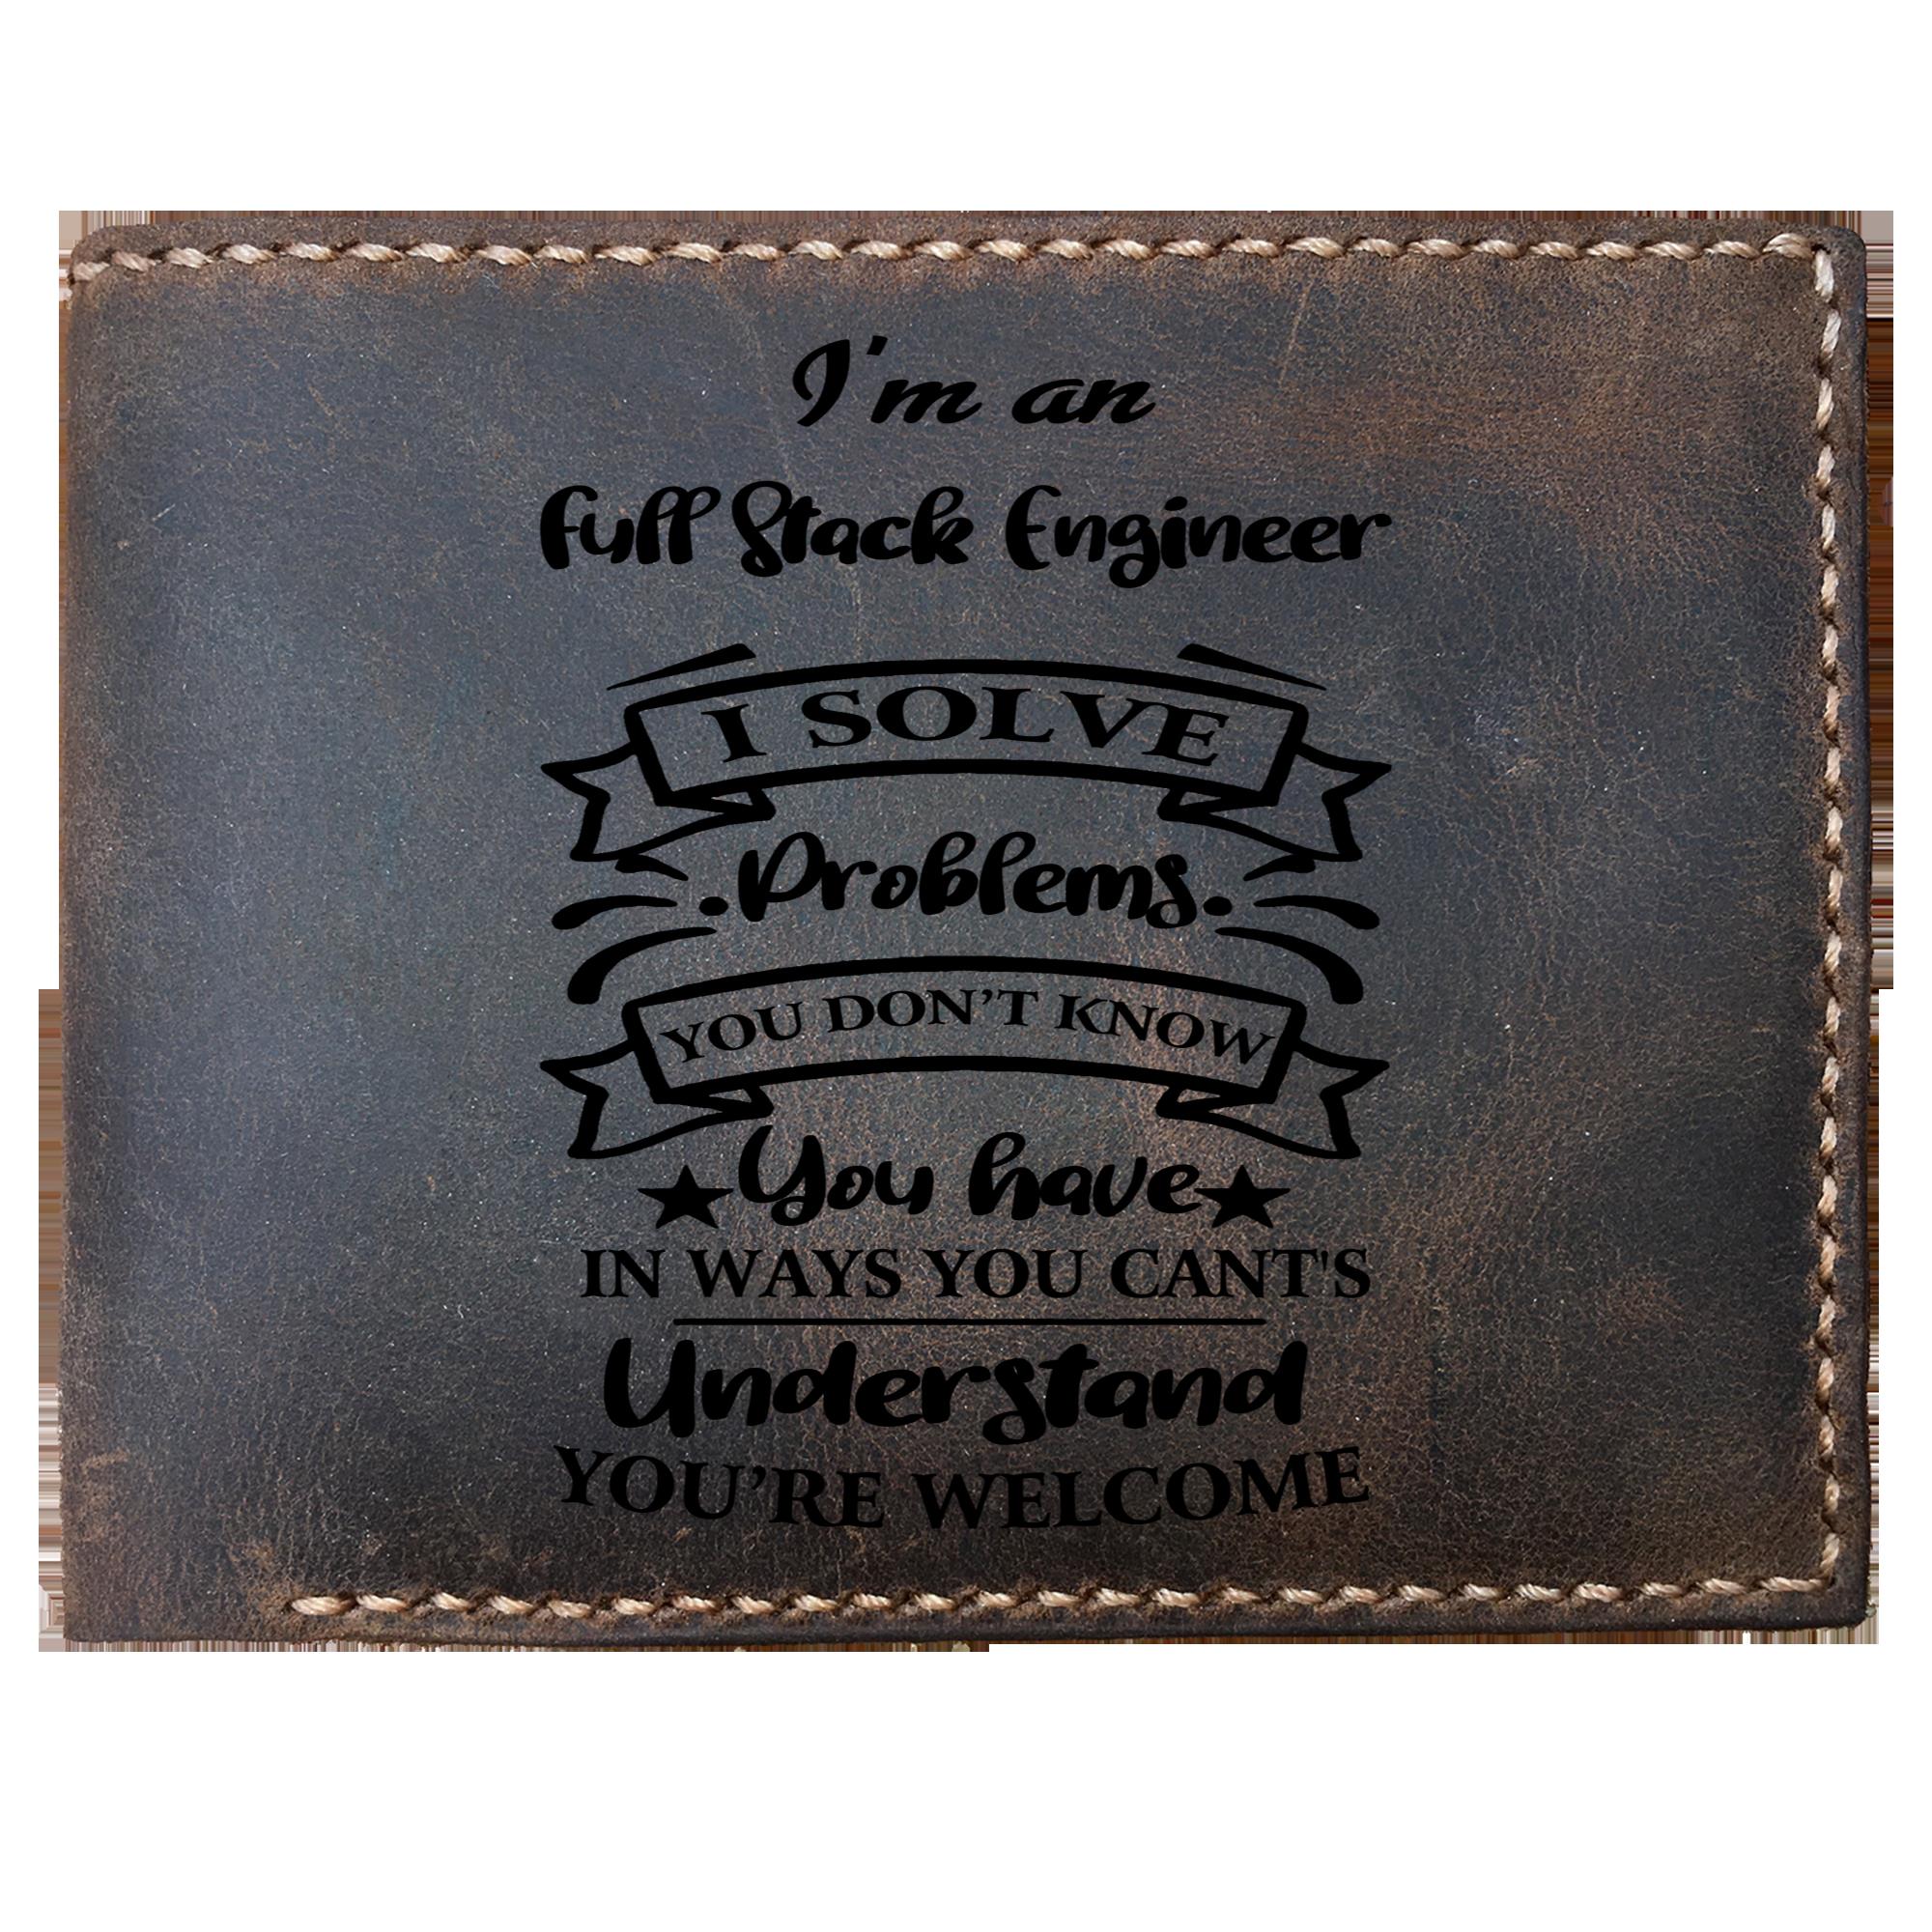 Skitongifts Funny Custom Laser Engraved Bifold Leather Wallet For Men, I'm an Full Stack Engineer Solve Problems, Father's Day Gifts